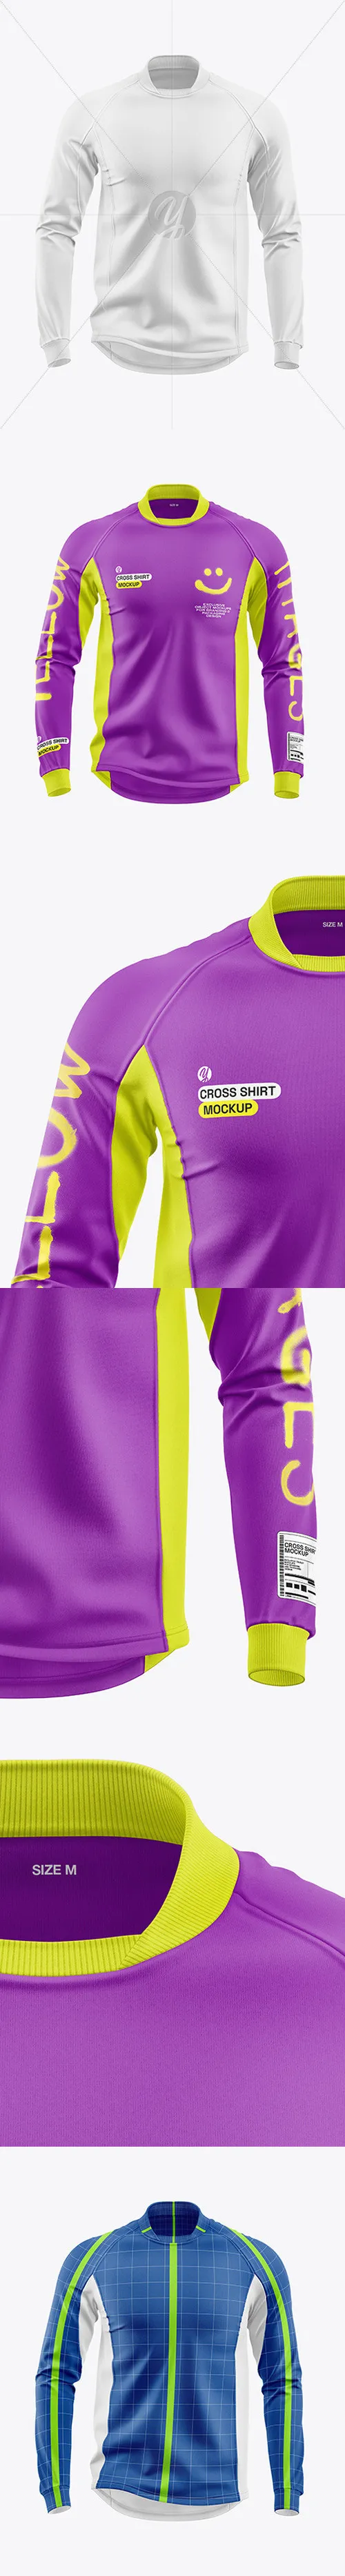 Crossshirt Jersey Mockup - Front View 133151